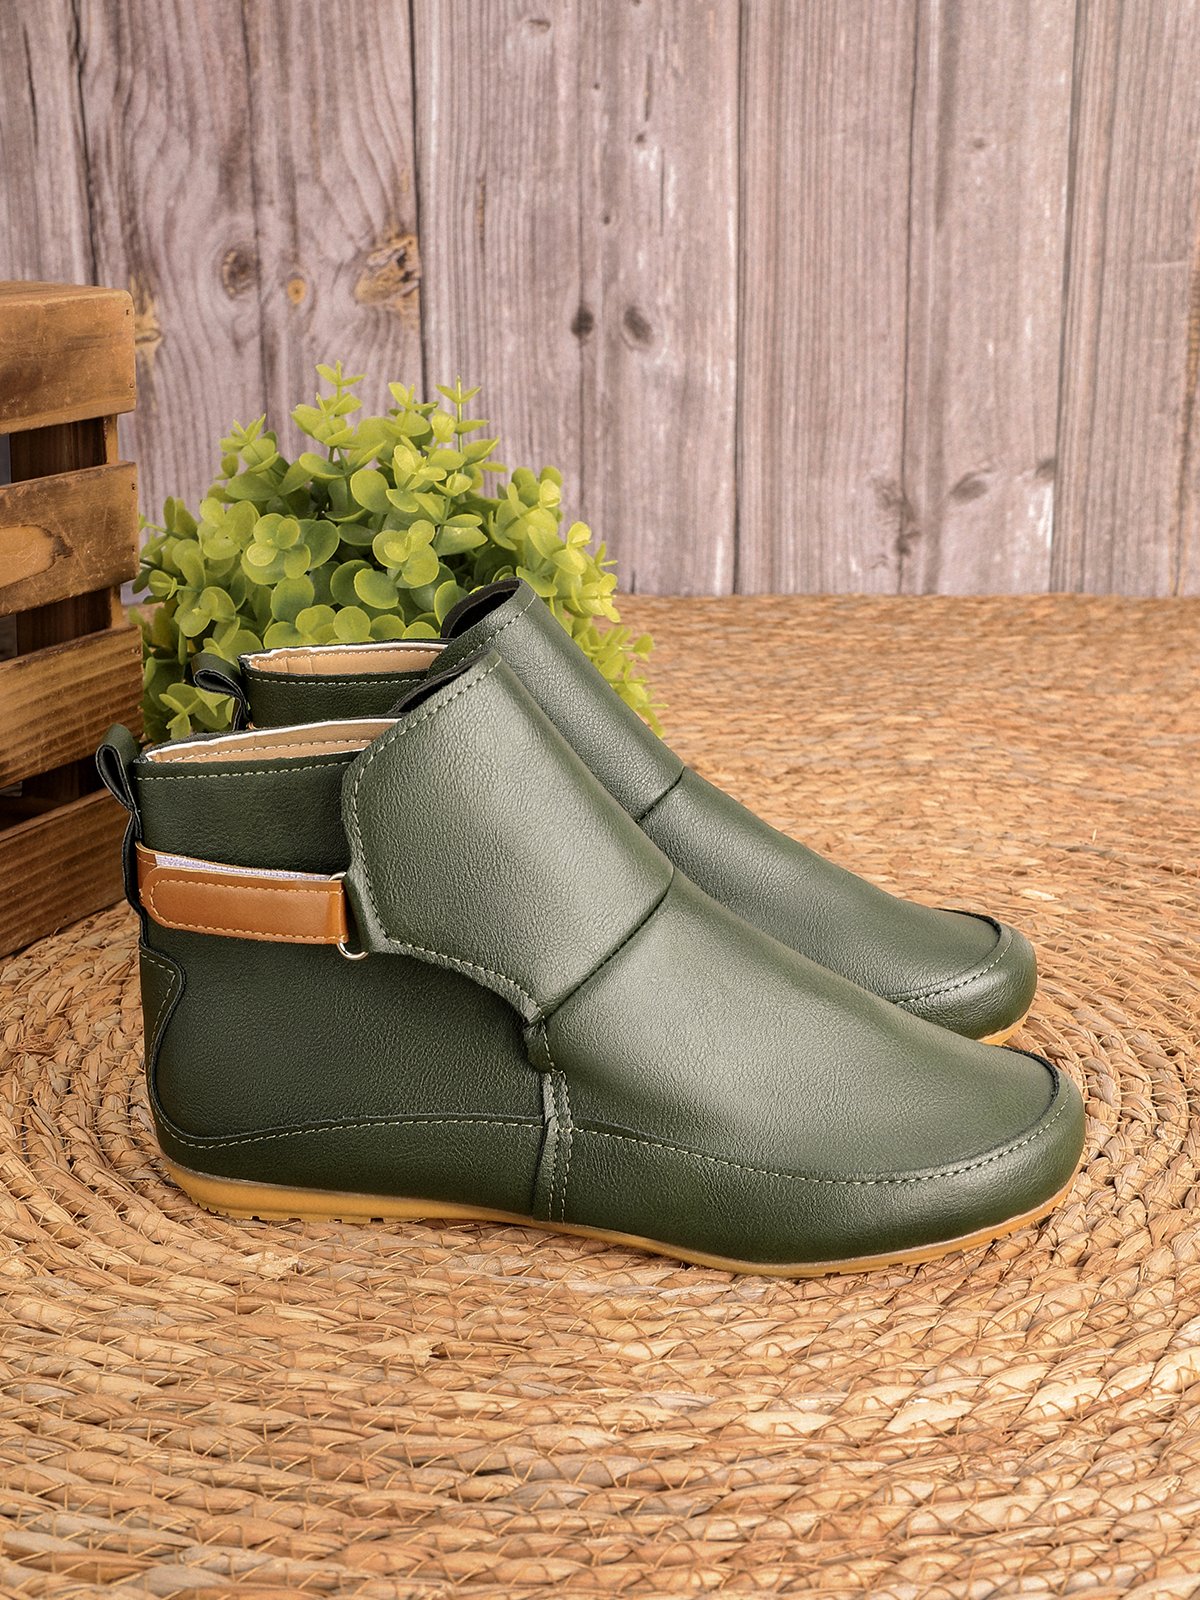 zolucky Women Casual Green Daily Adjustable Soft Leather Booties